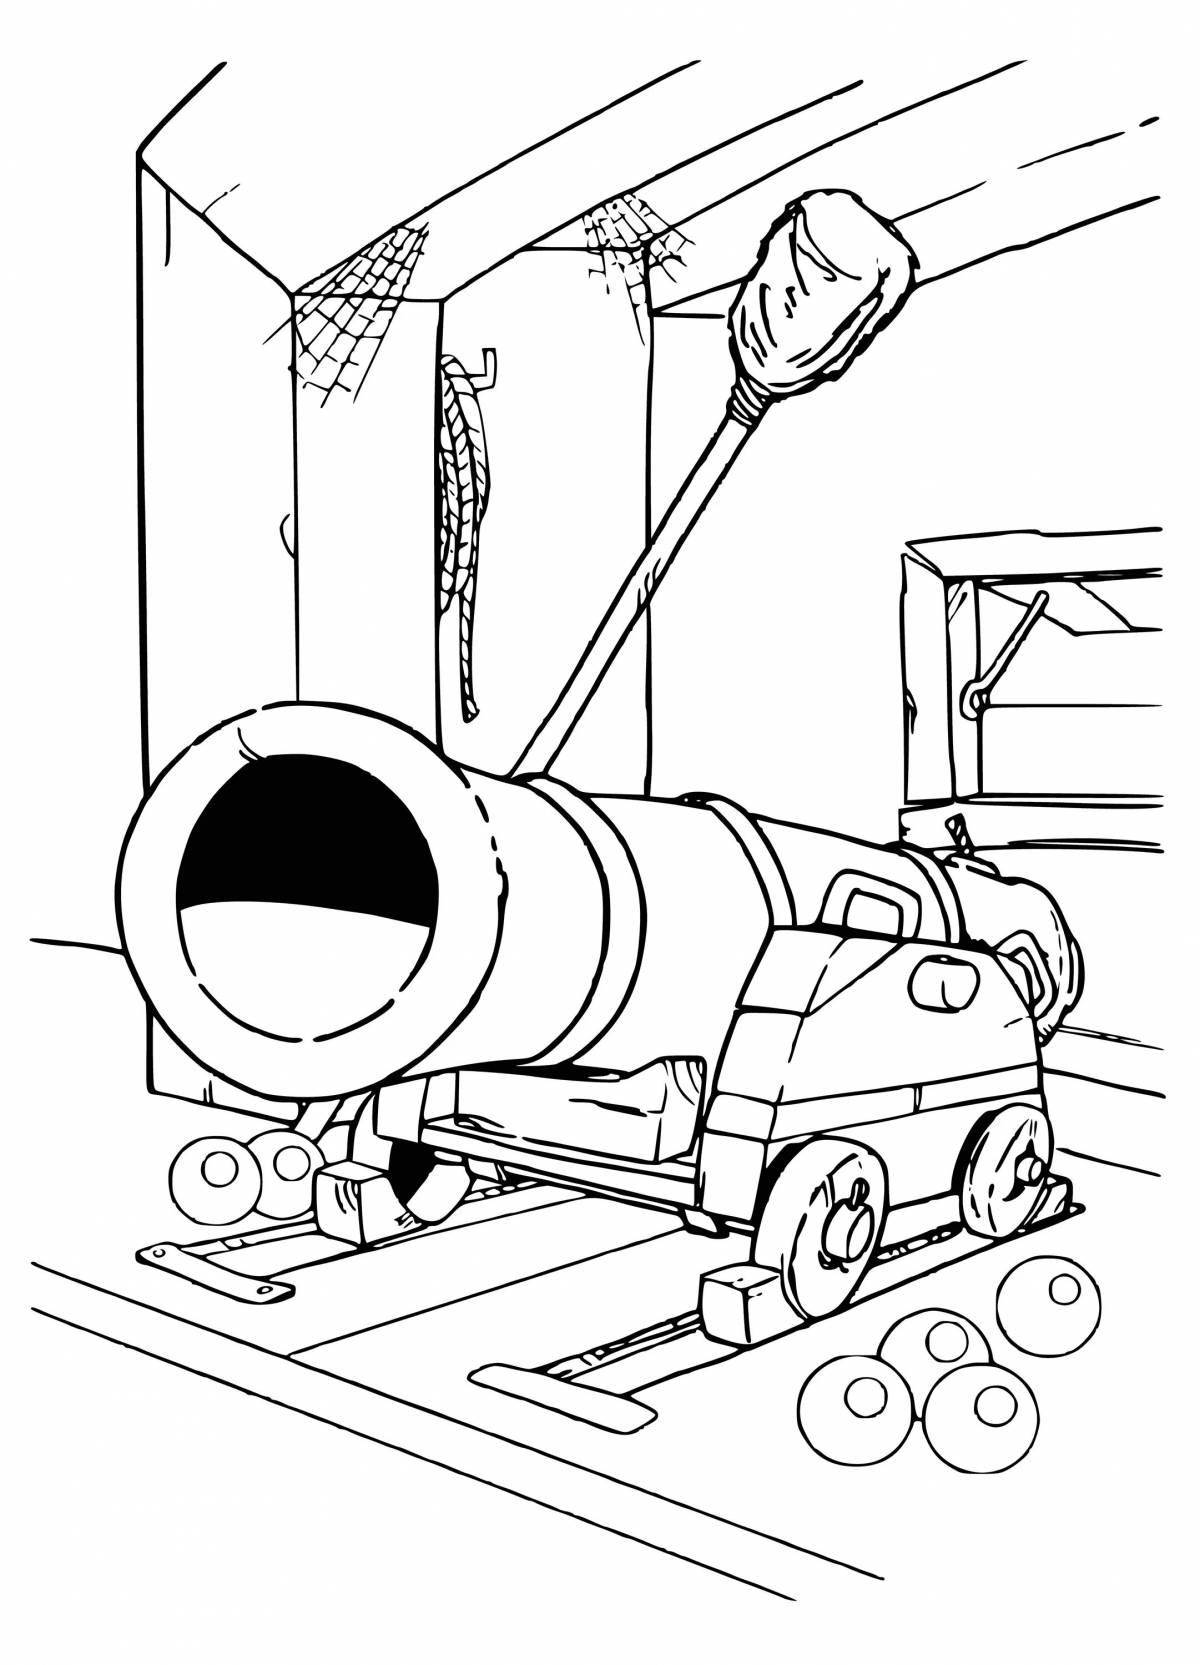 Exquisite coloring pages with weapons for boys